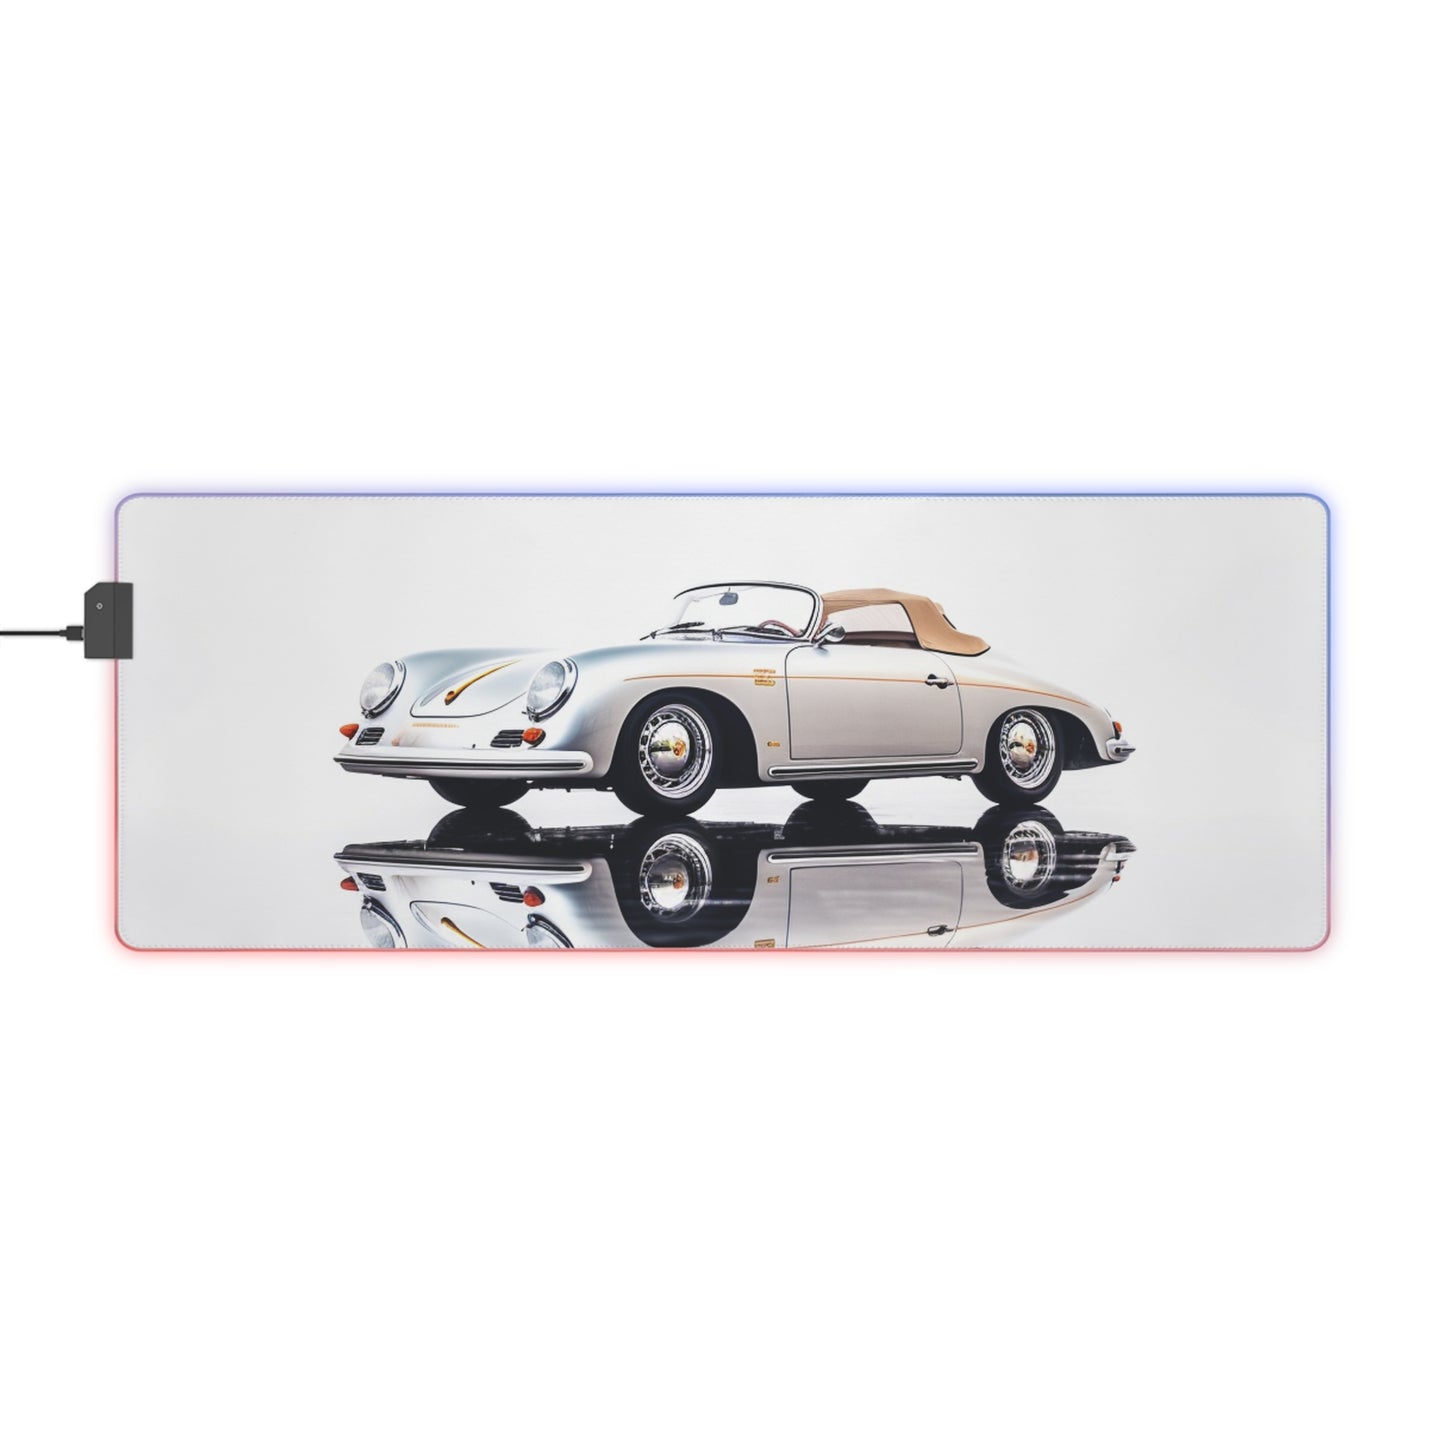 LED Gaming Mouse Pad 911 Speedster on water 2